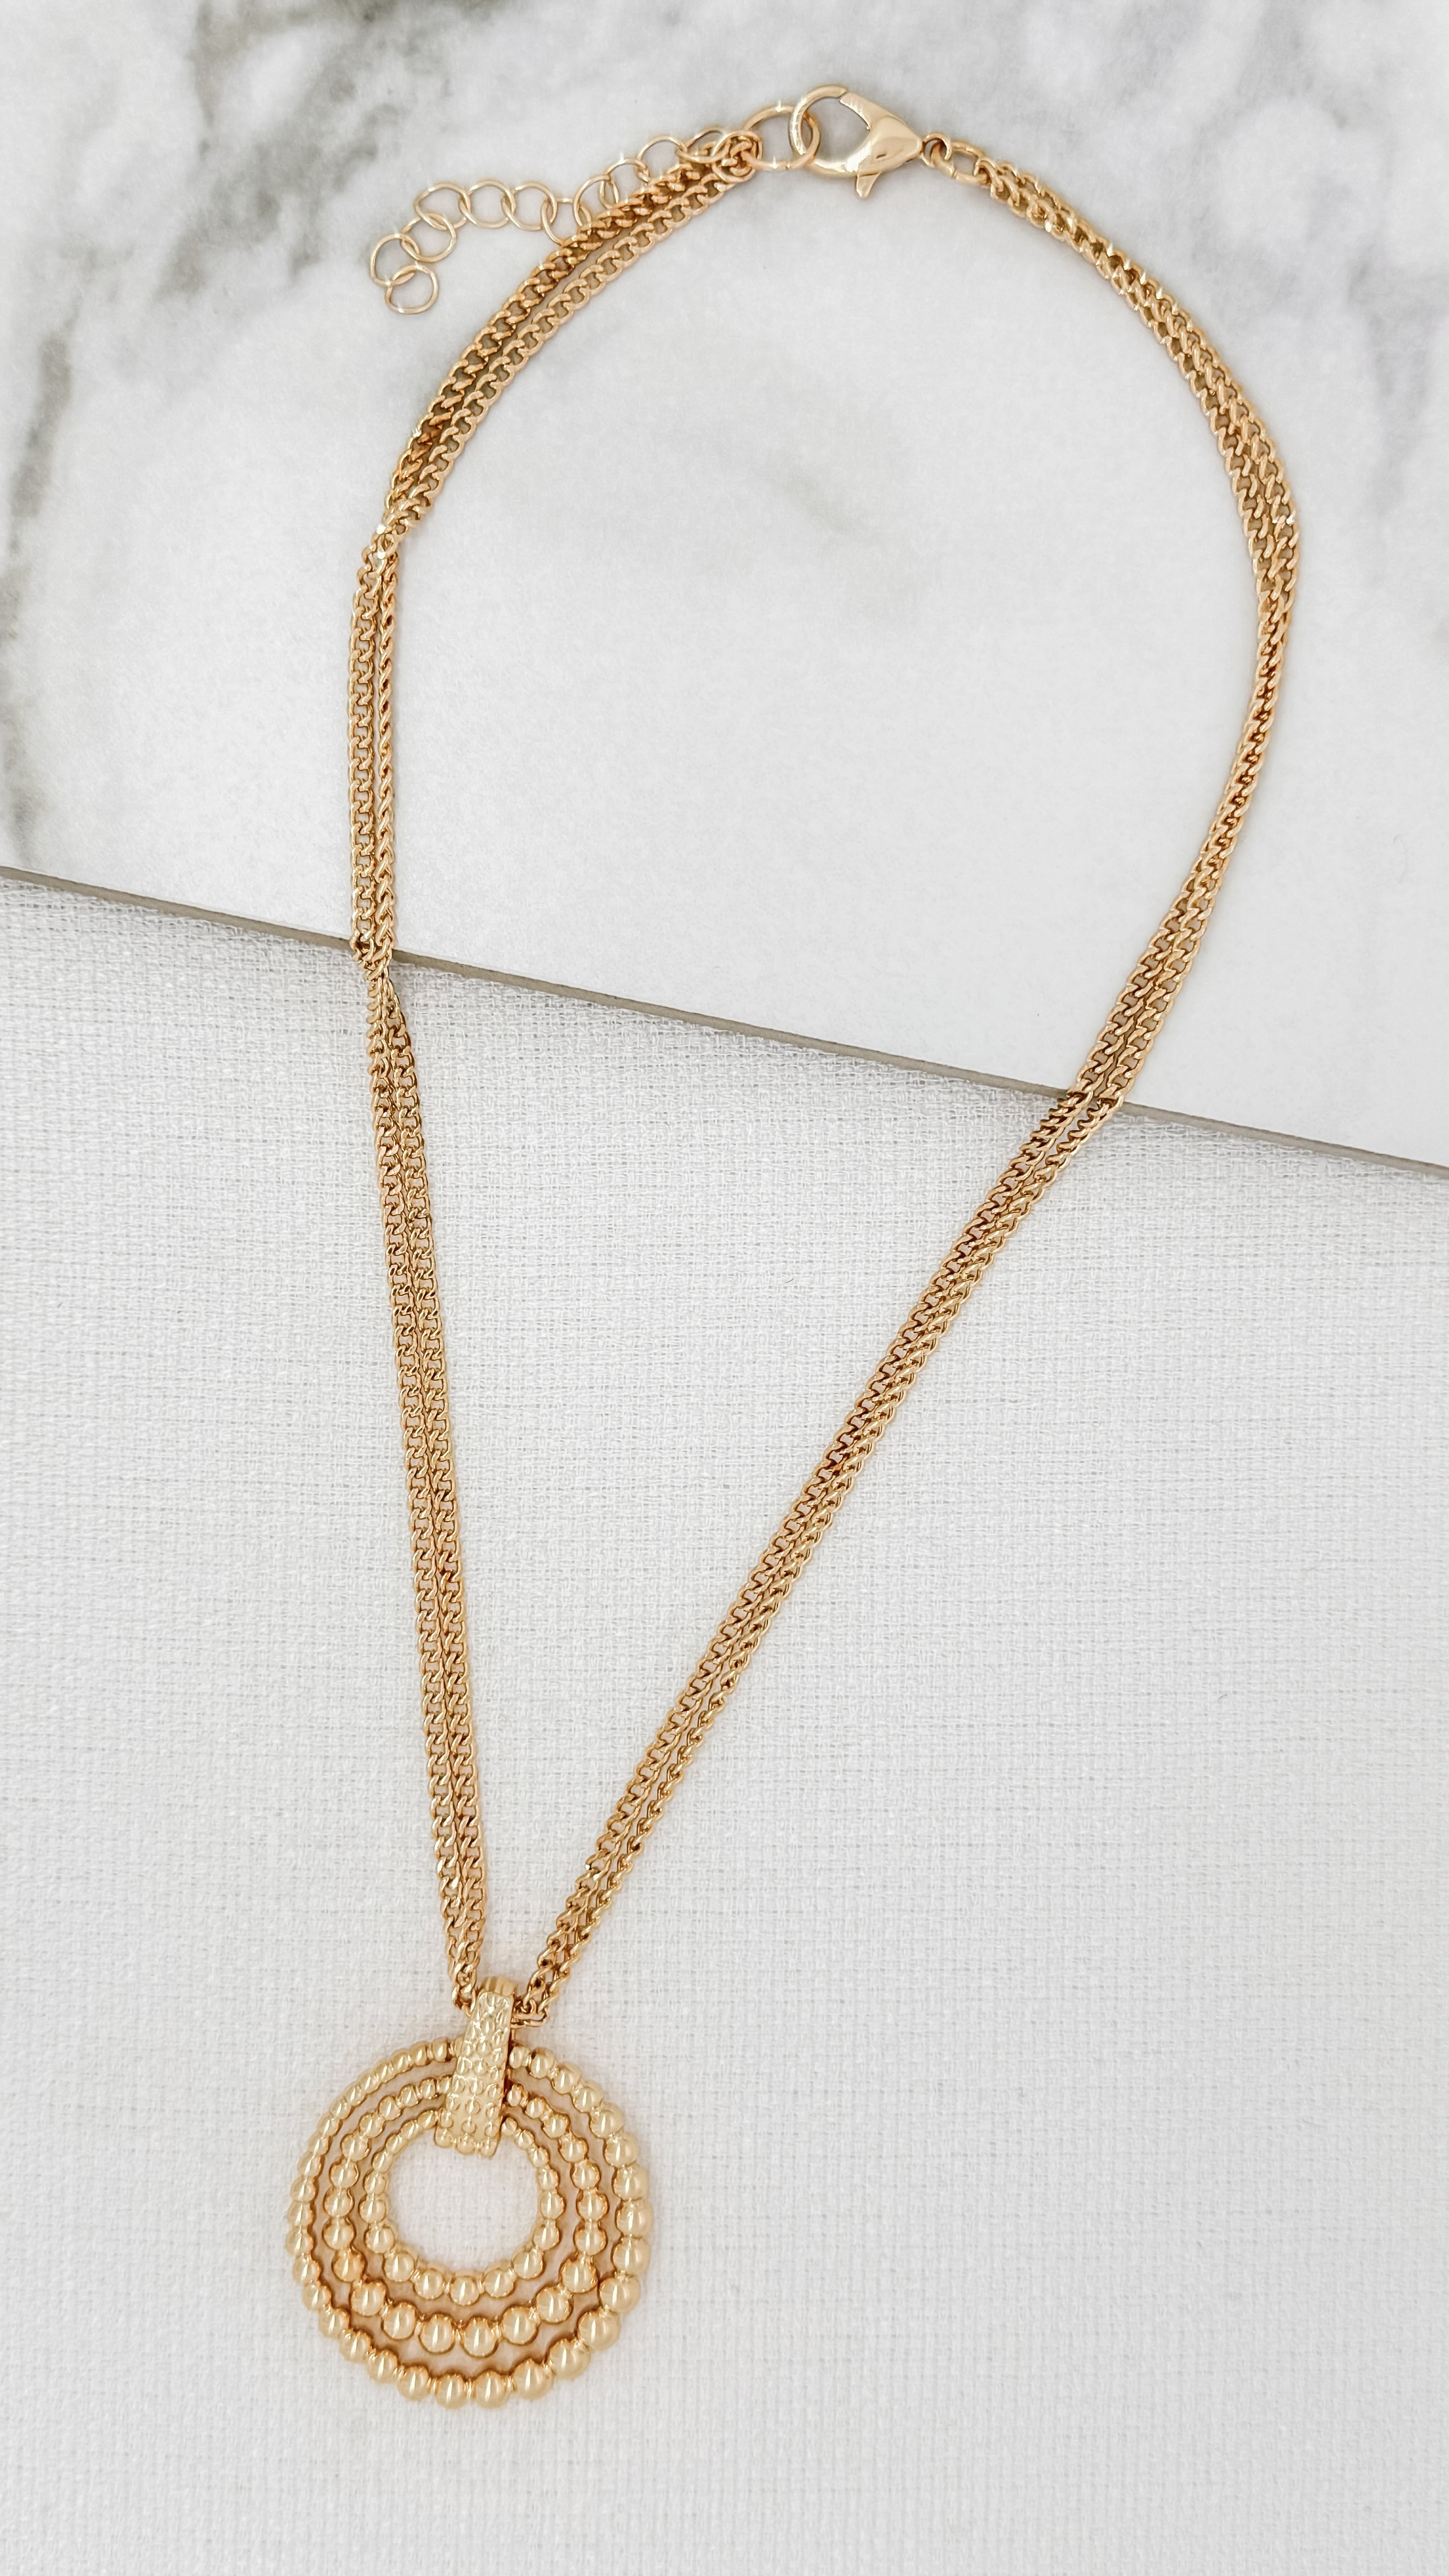 Beaded Pendant Necklace in Gold